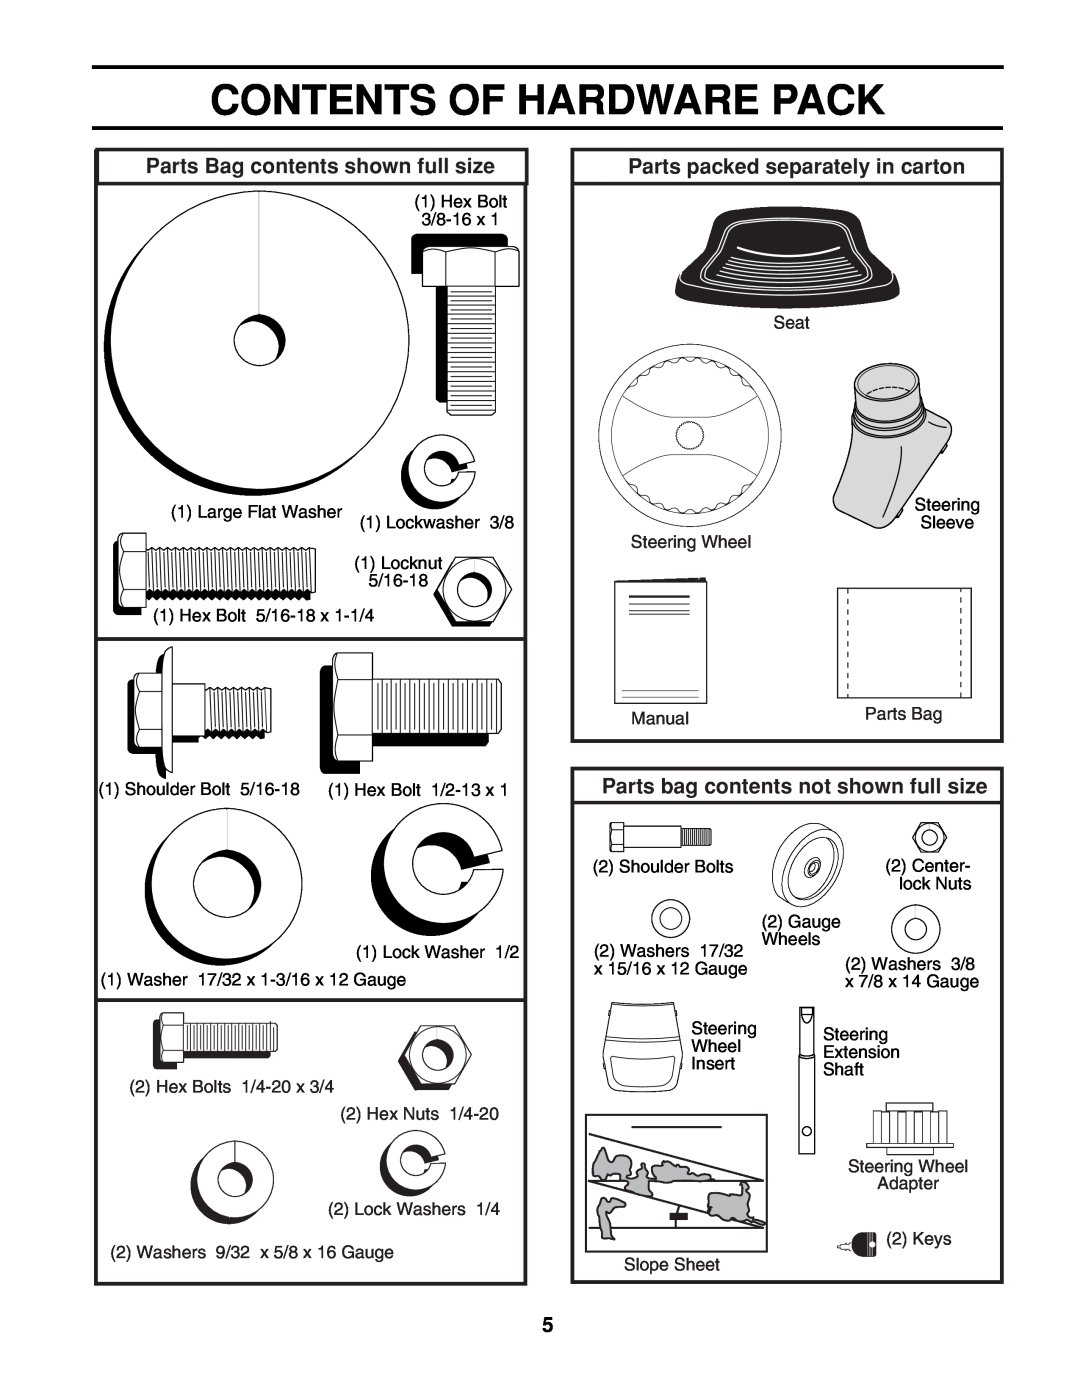 Poulan 161608 owner manual Contents Of Hardware Pack, Parts Bag contents shown full size, Parts packed separately in carton 